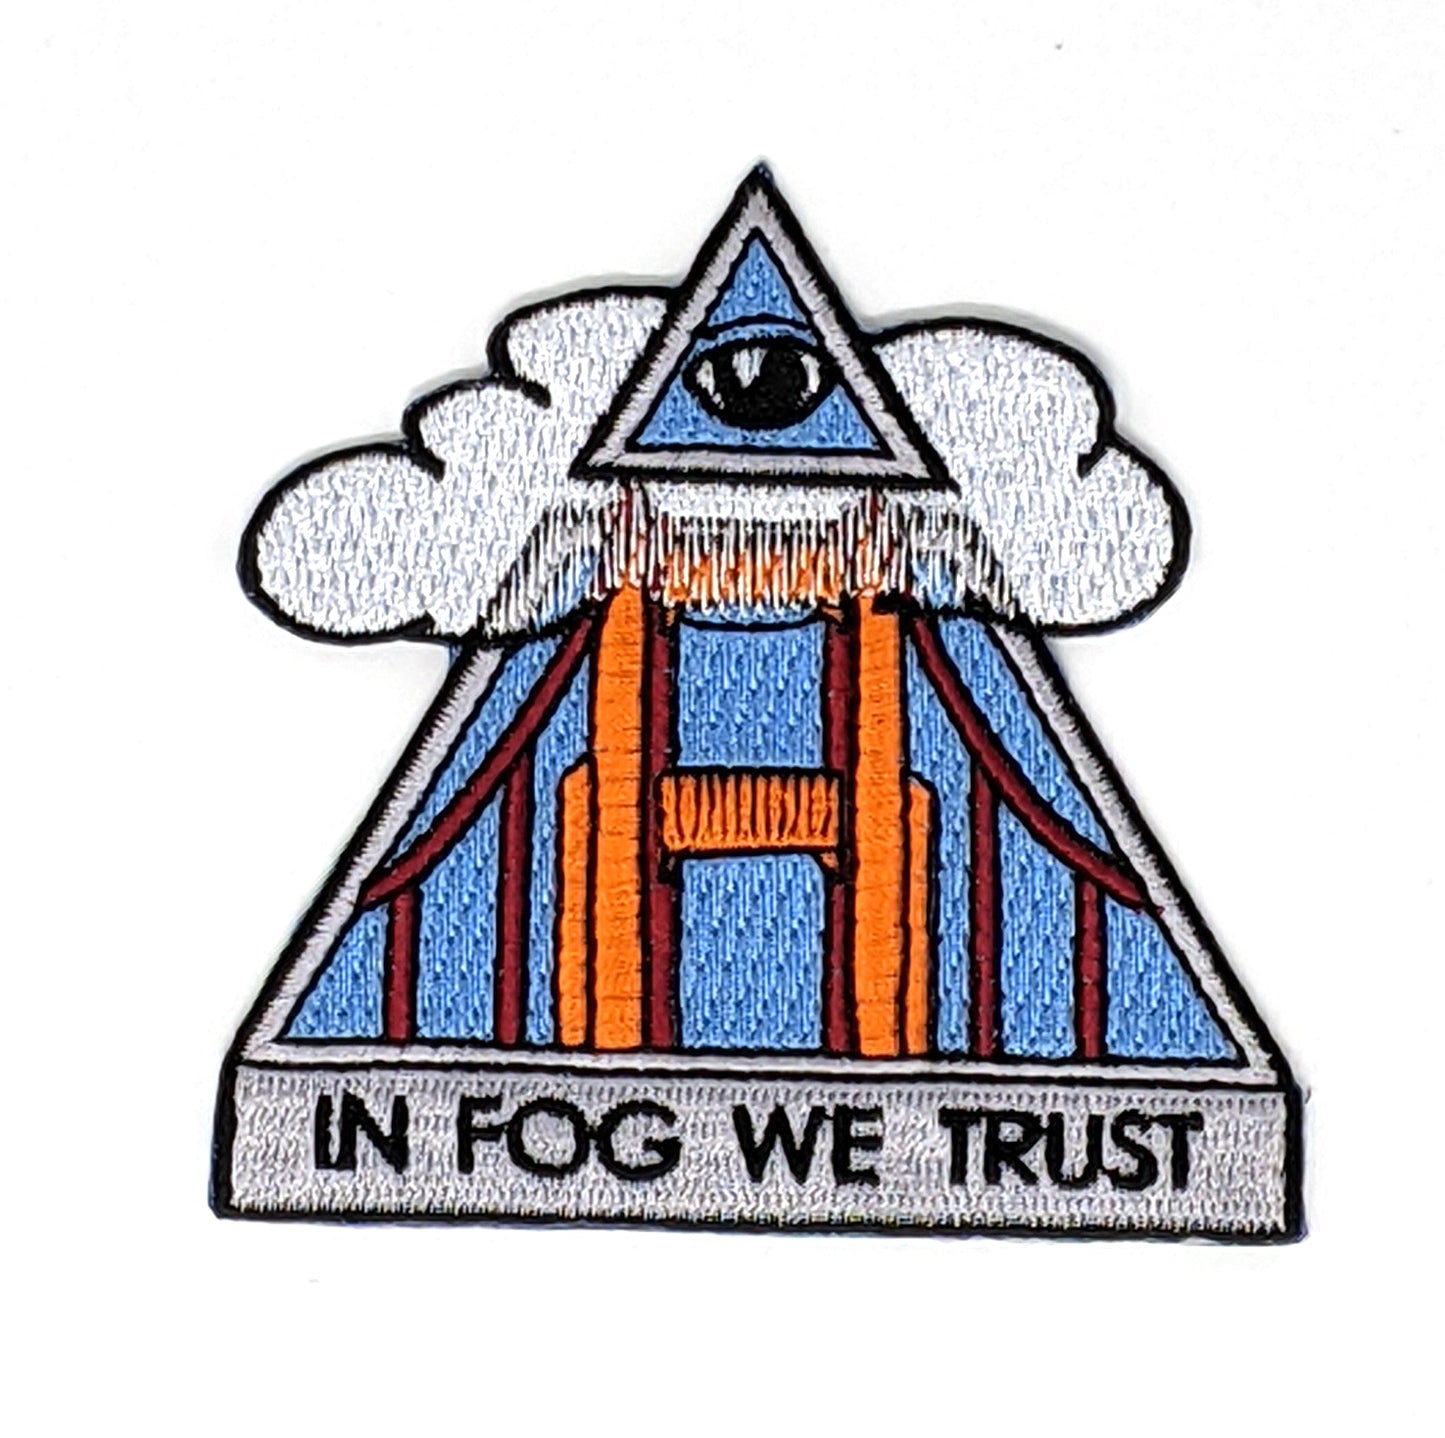 Embroidered Patch: In Fog We Trust by Sarah Duyer